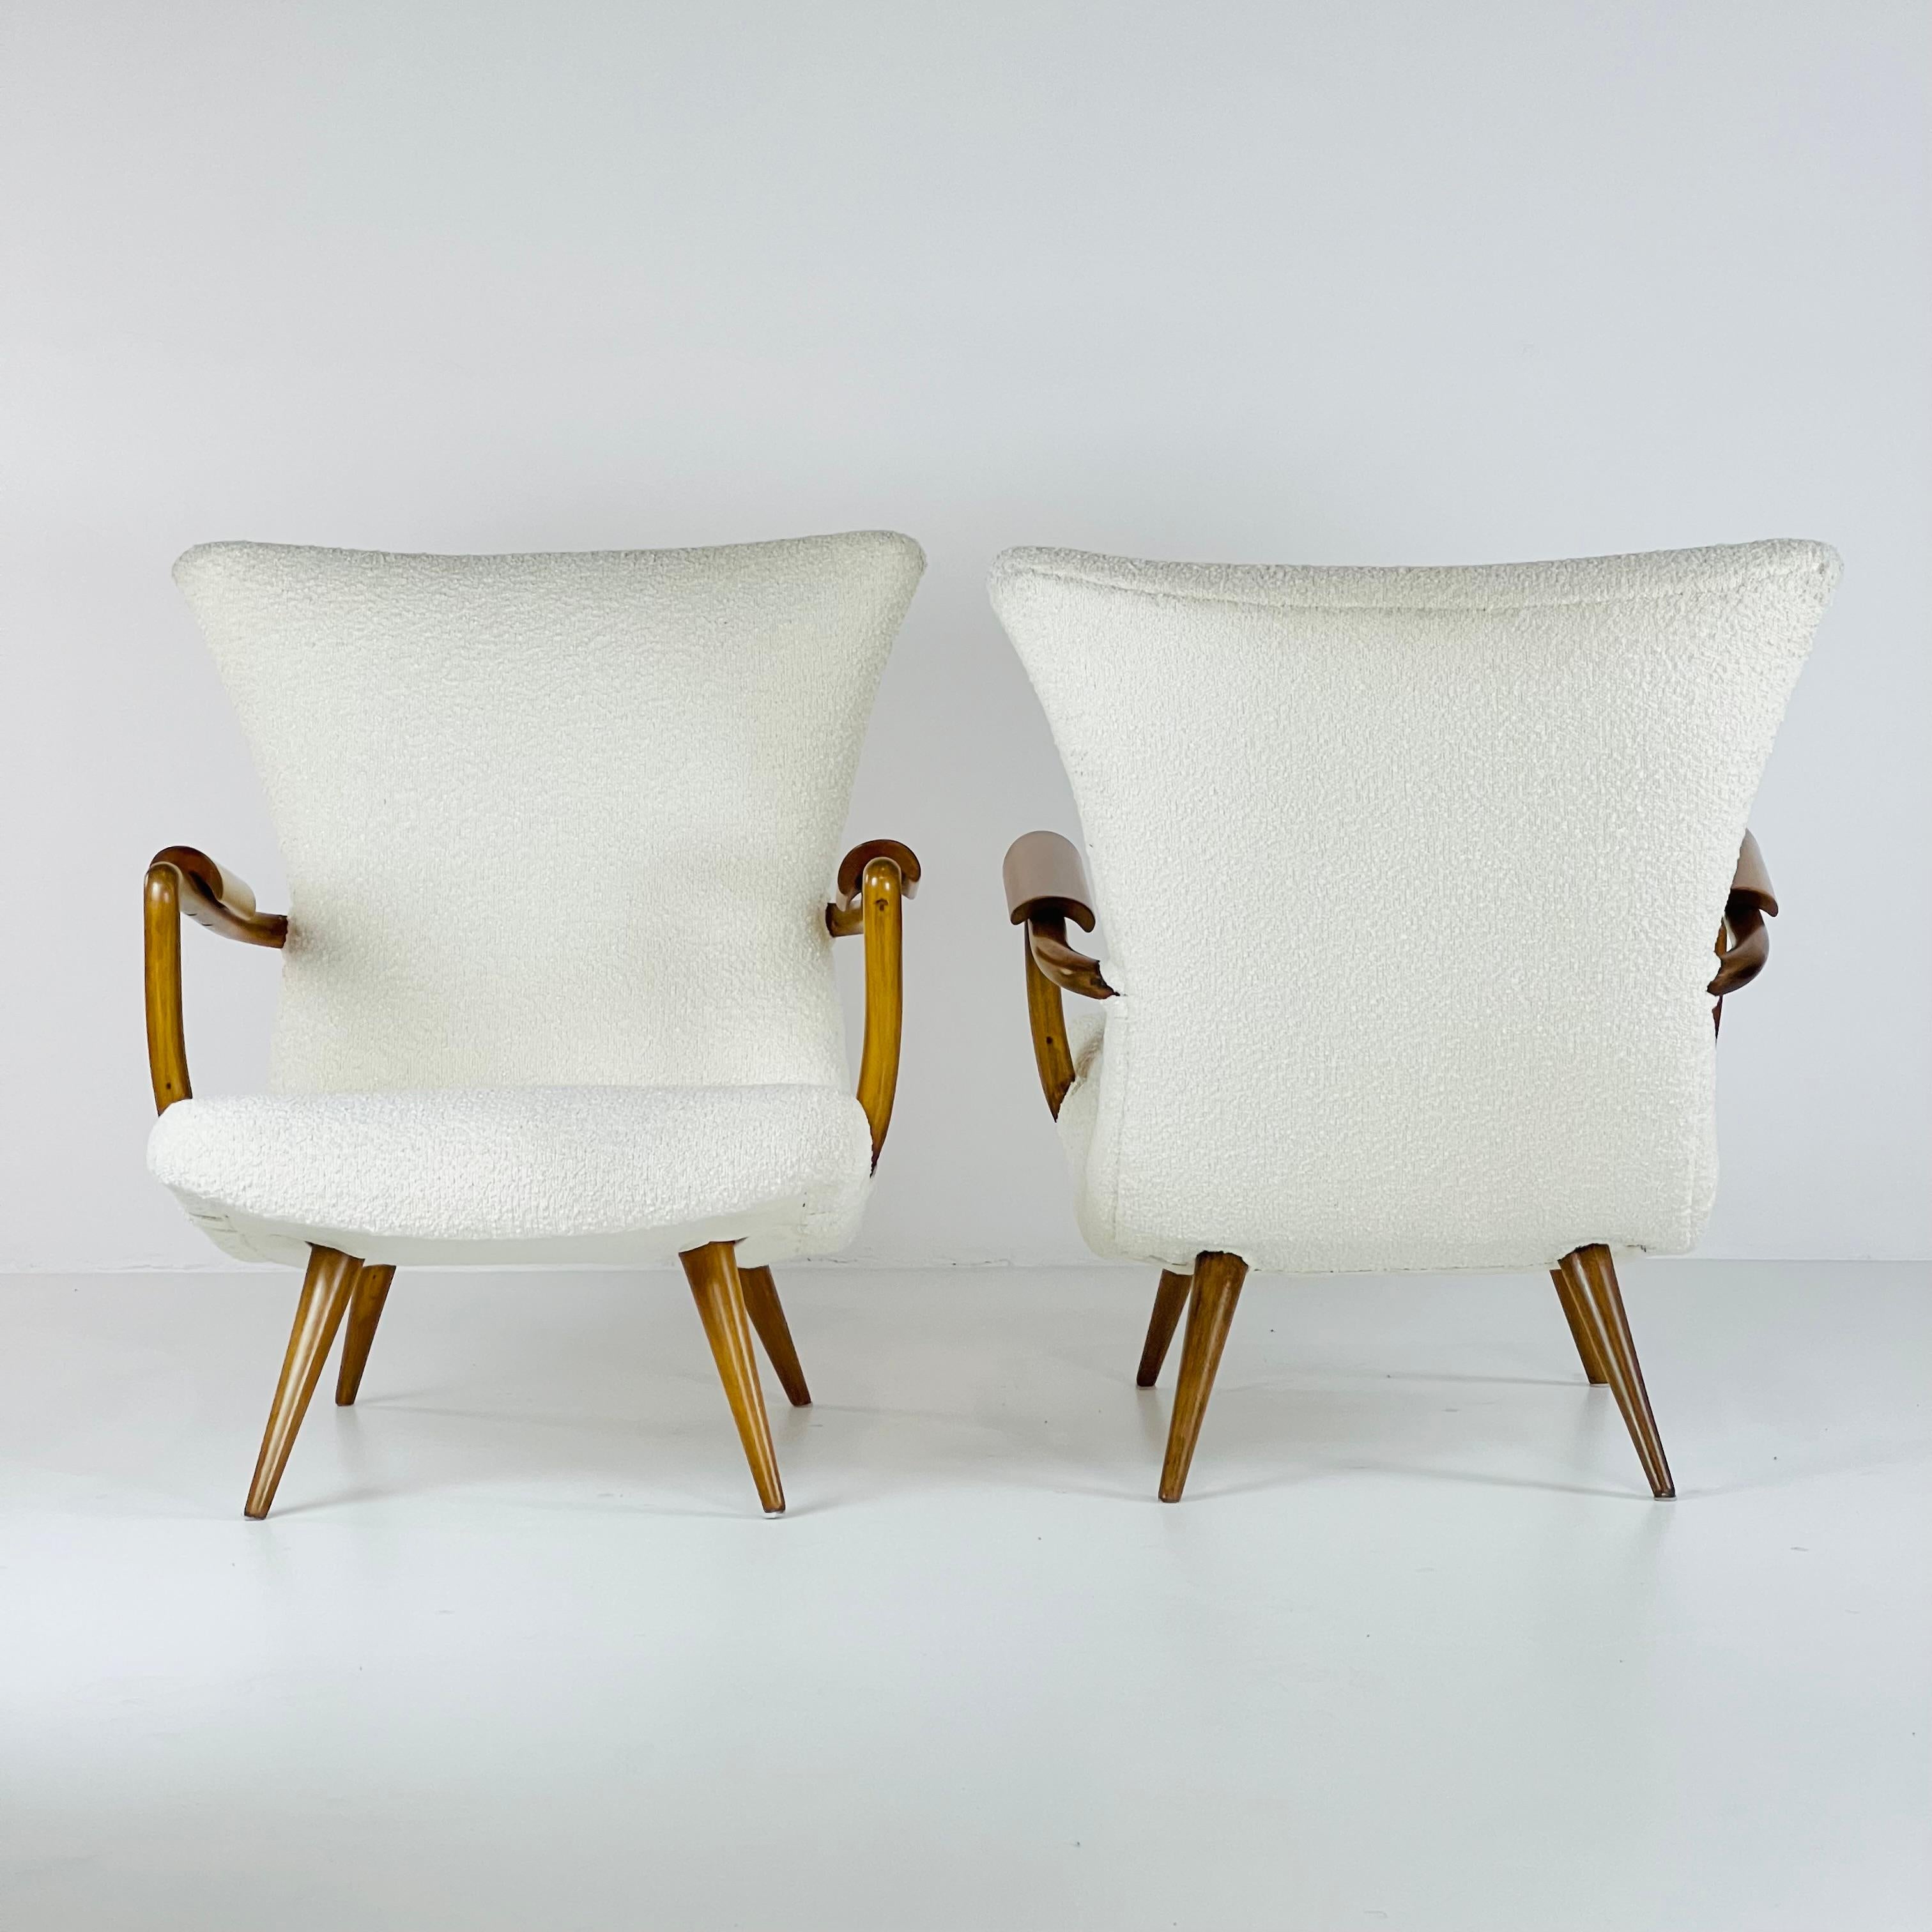  This beautiful pair of lounge chairs designed in the 50s its a great example of Scapinelli's style. The structures made in Caviúna wood and the curved lines showcase the best characteristics and craftsmanship of the designer. 
 They're both in